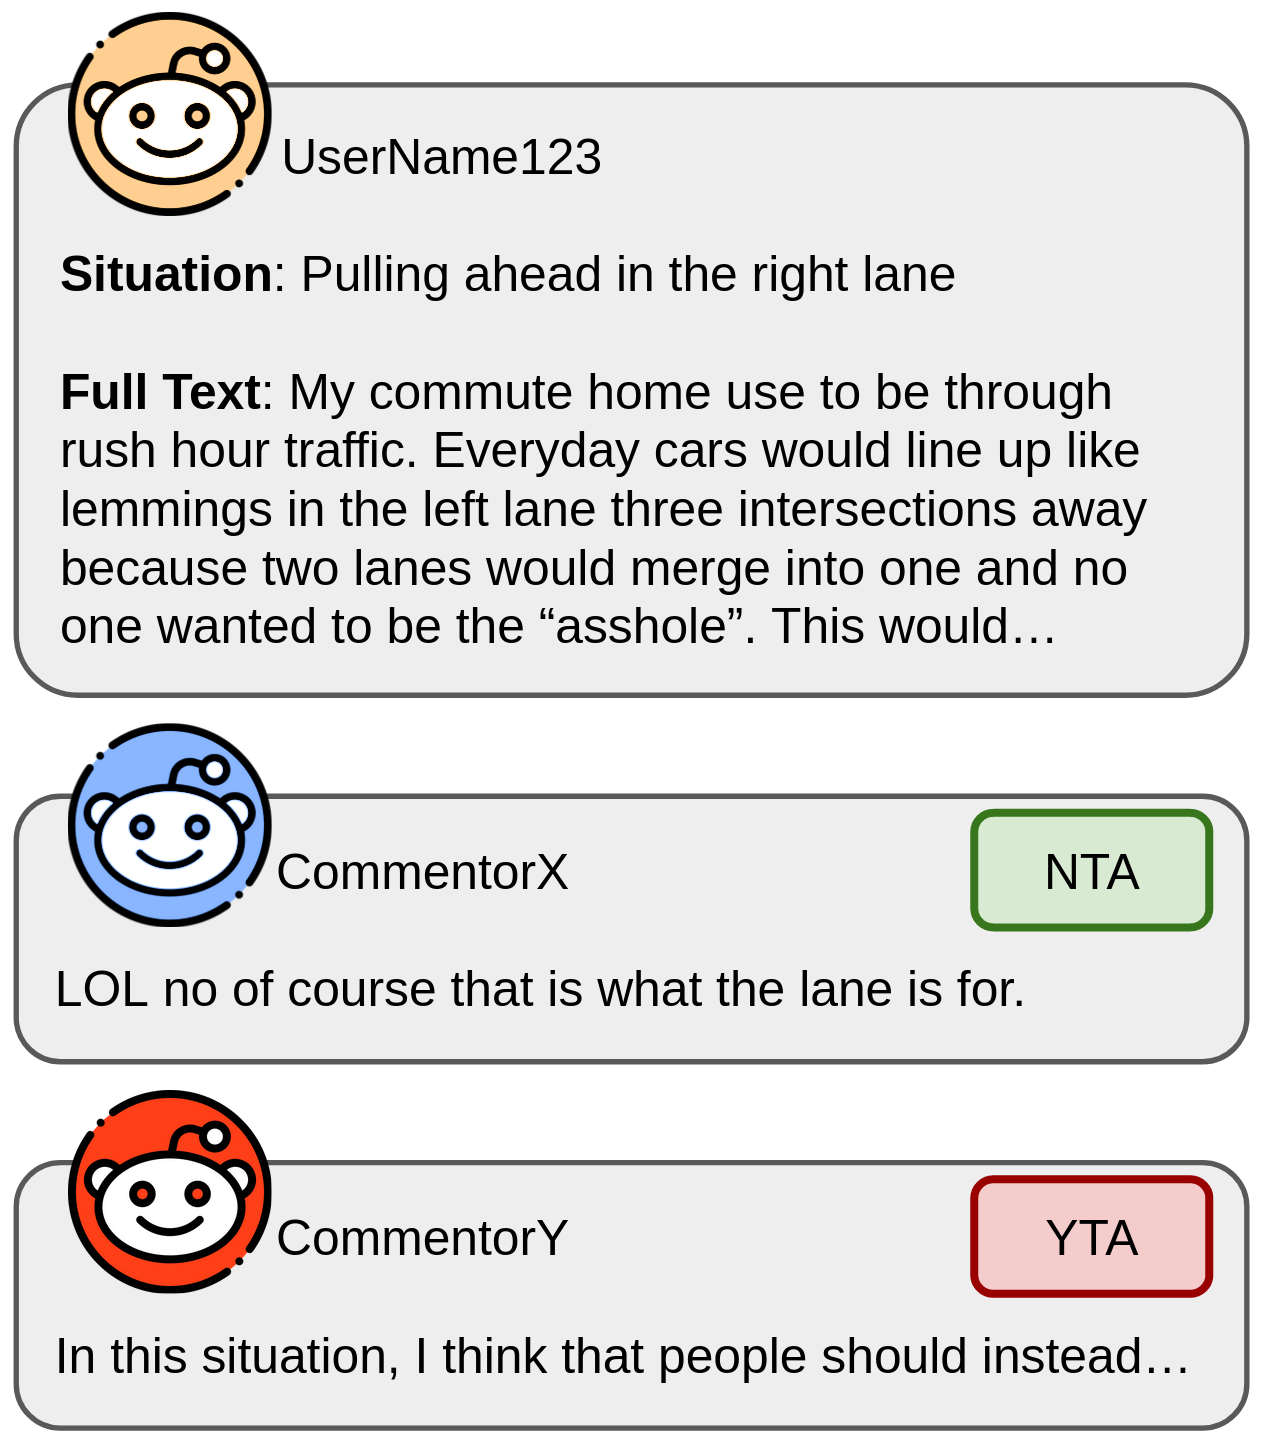 Example of a post on Reddit and two comments. The post has the situation, which comes from the post title and the full text of the post (truncated here). Usernames appear next to the icons of the poster and commentors. Each comment has a verdict, which is the label they assign (YTA or NTA).